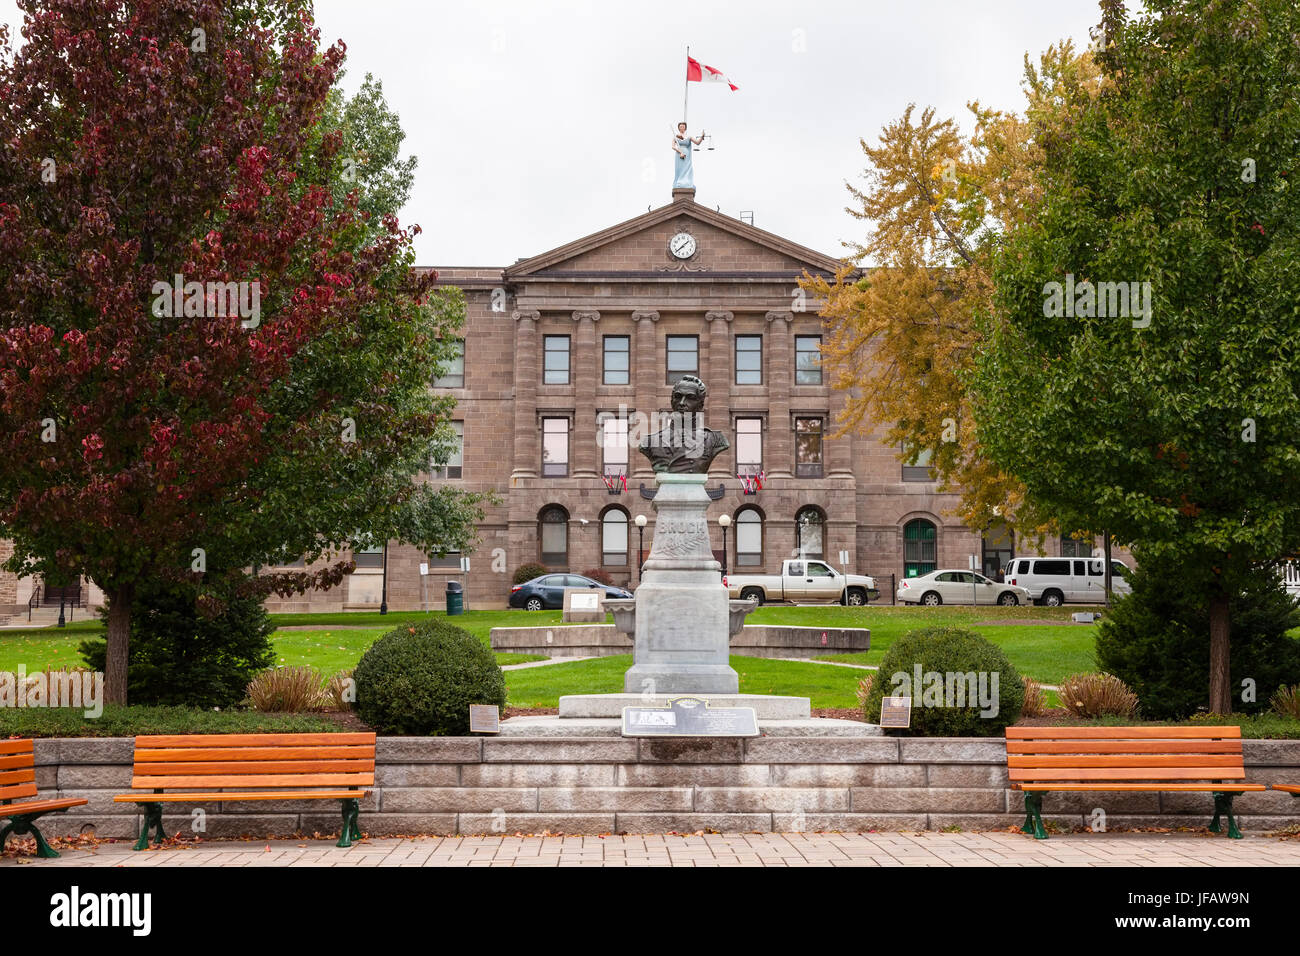 Il Leeds e Grenville County Court House in downtown Brockville, Ontario, Canada. Foto Stock